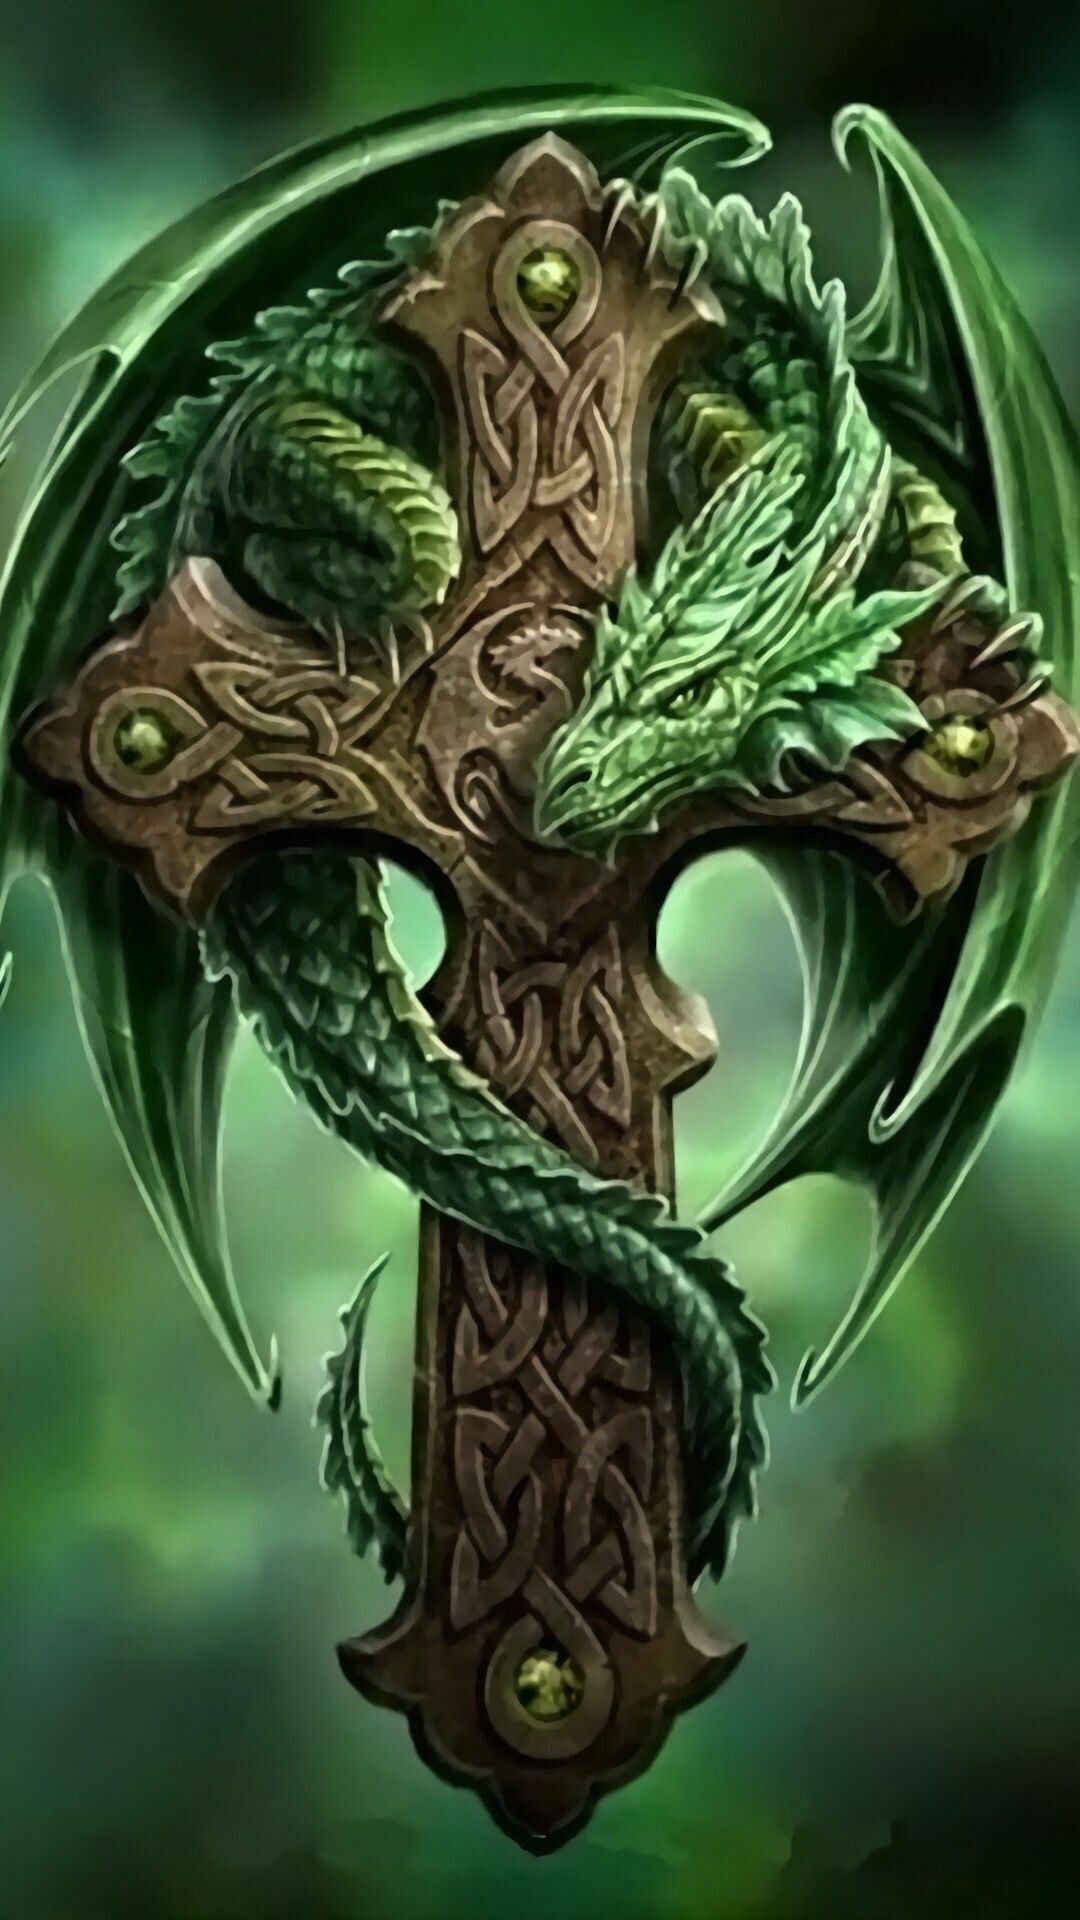 Dragon: Associated with the elements of water, earth, air, and fire in Druid and Celtic mysticism. 1080x1920 Full HD Wallpaper.